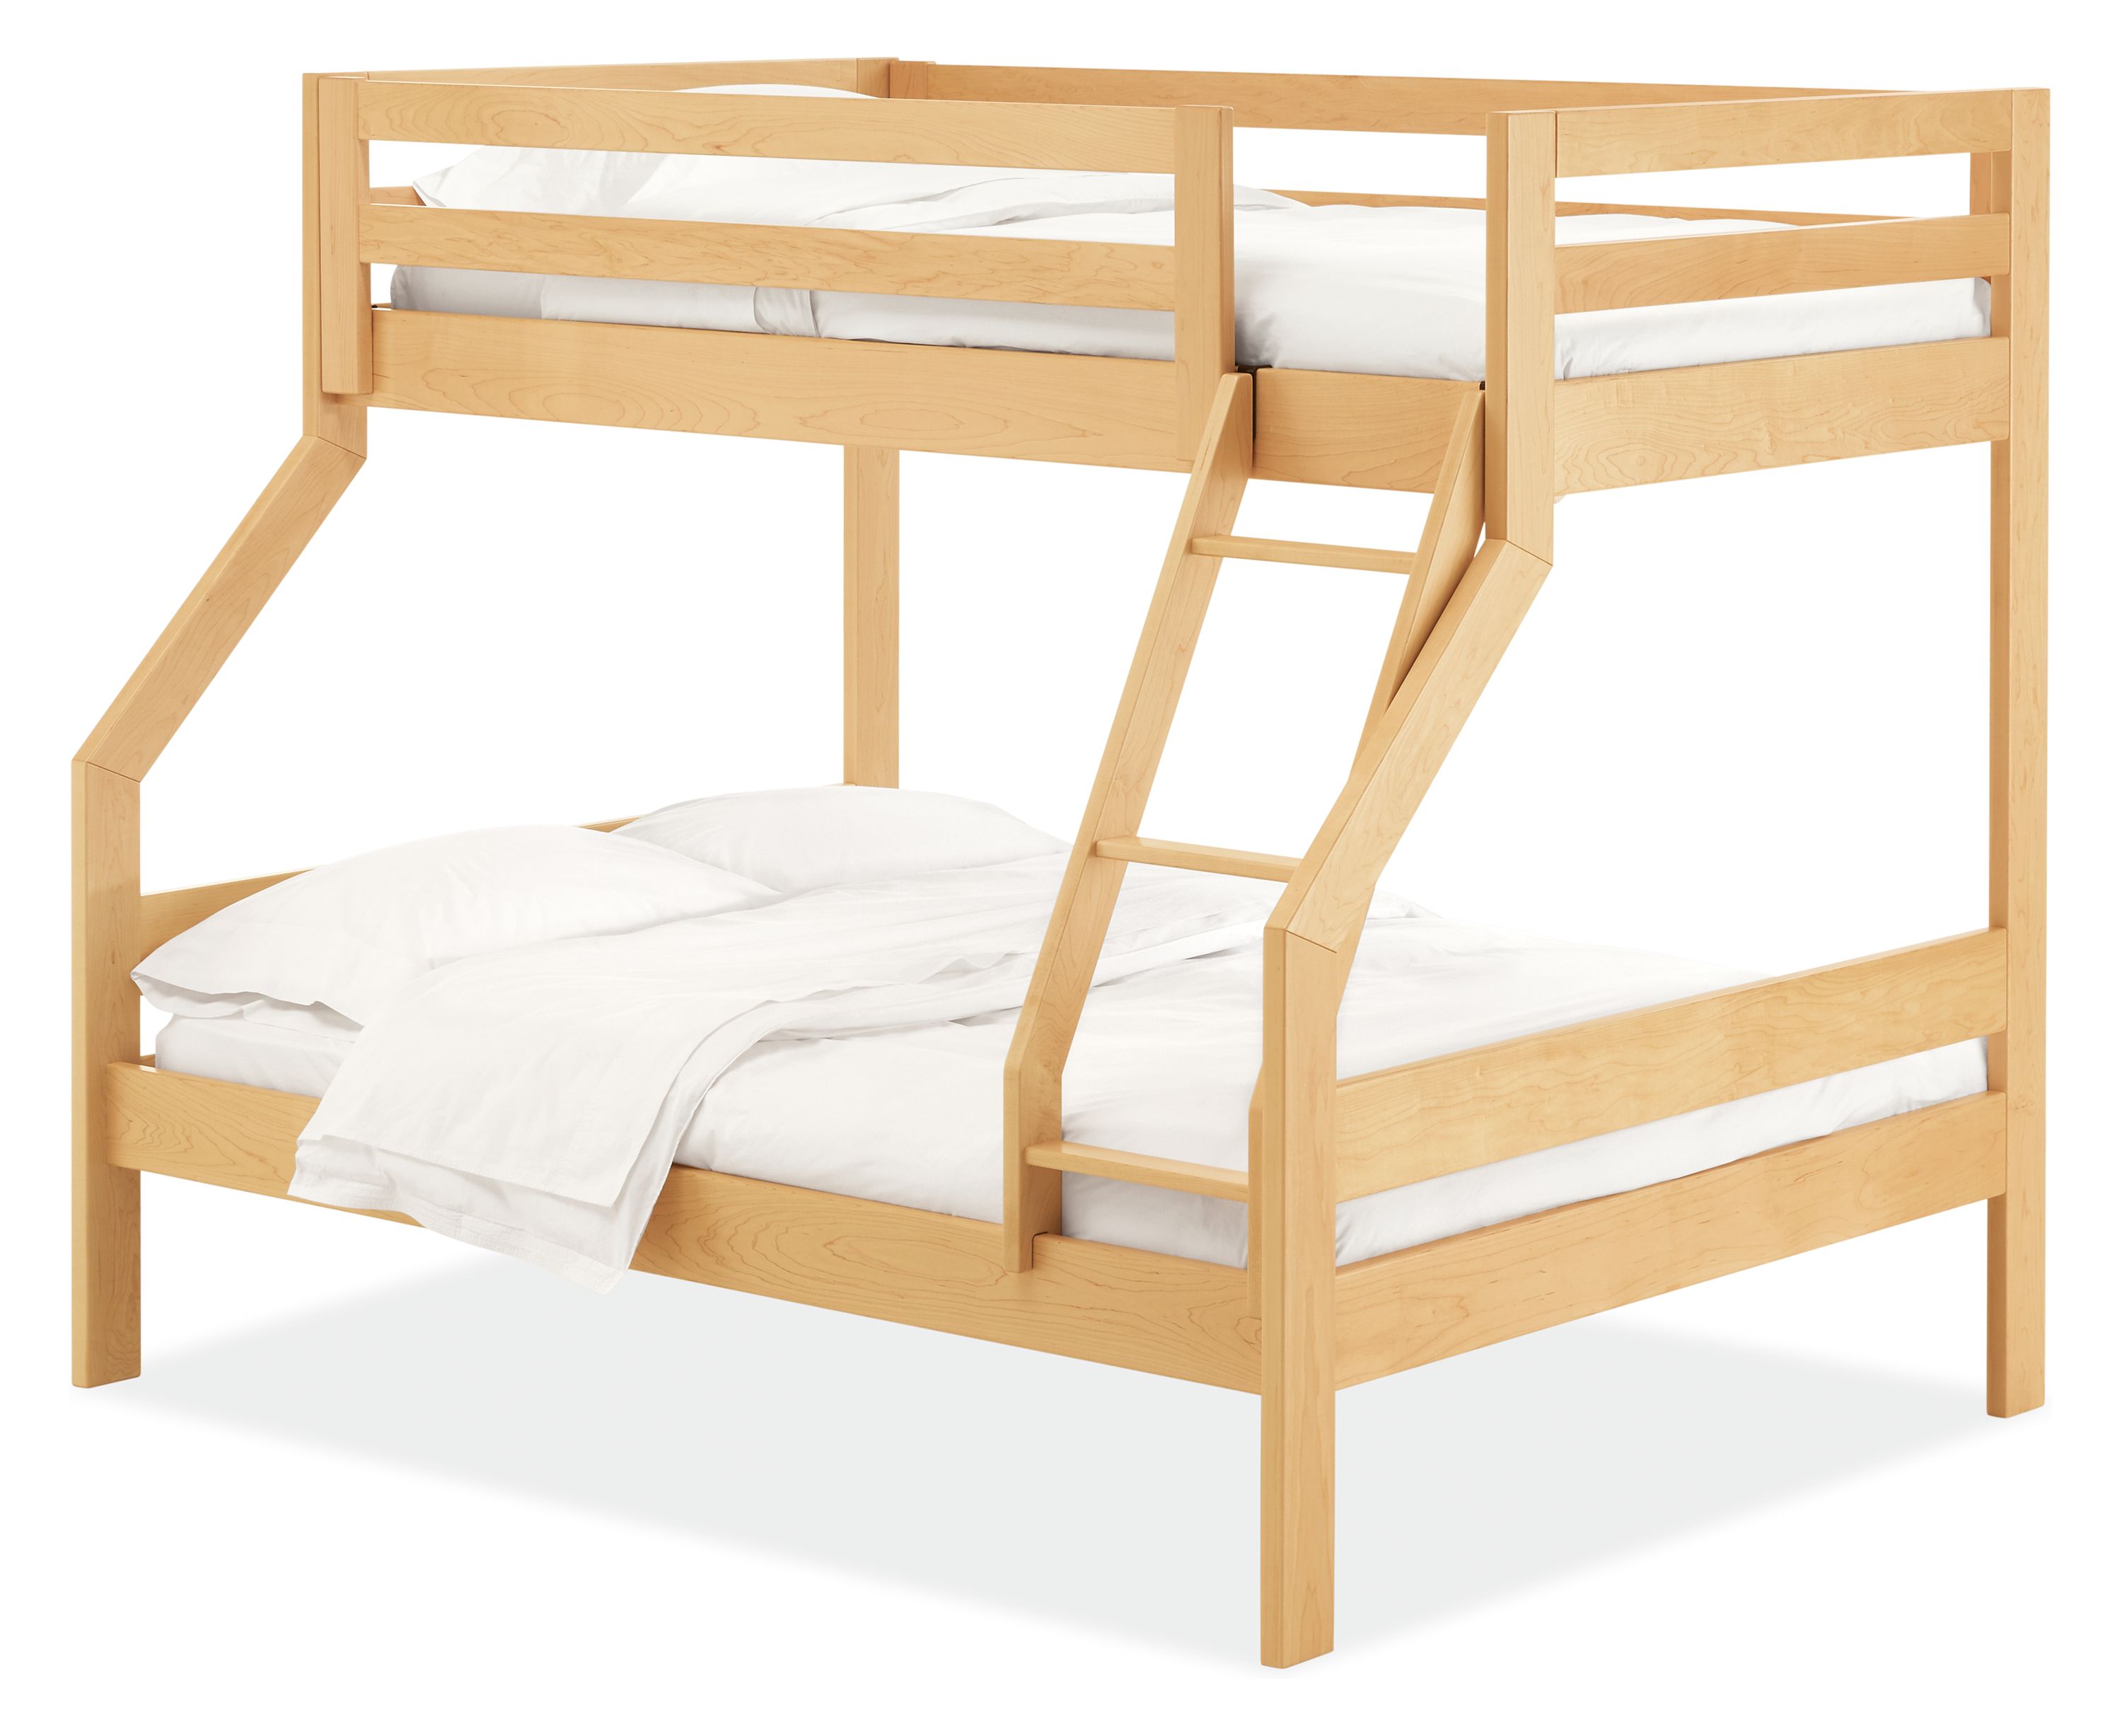 Waverly Bunk Bed Twin Over Full, Are Bunk Beds Twin Or Full